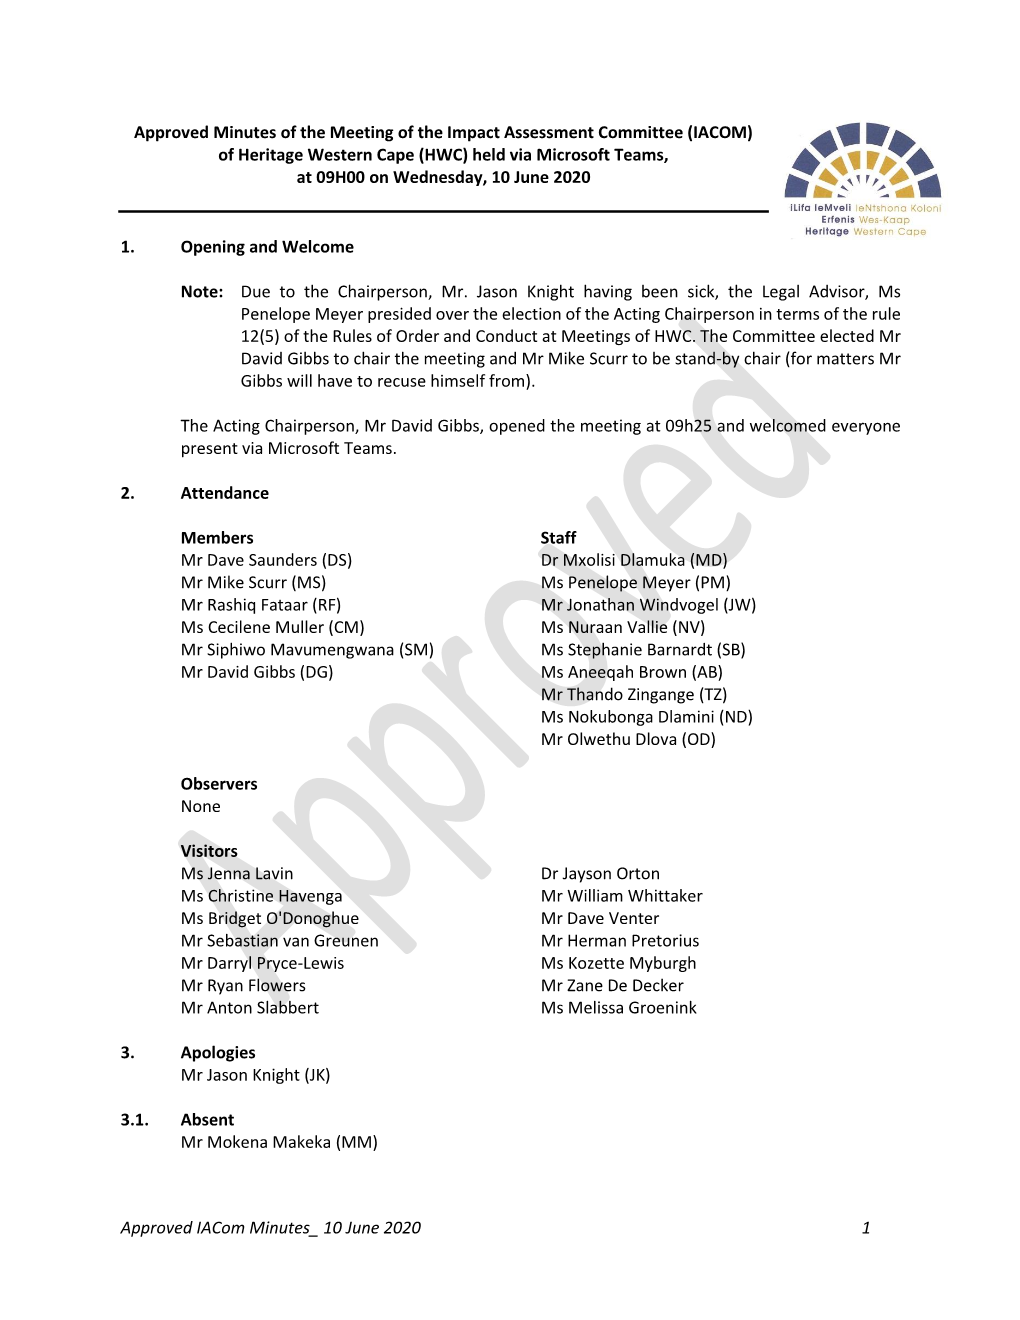 Approved Iacom Minutes 10 June 2020 1 Approved Minutes of the Meeting of the Impact Assessment Committee